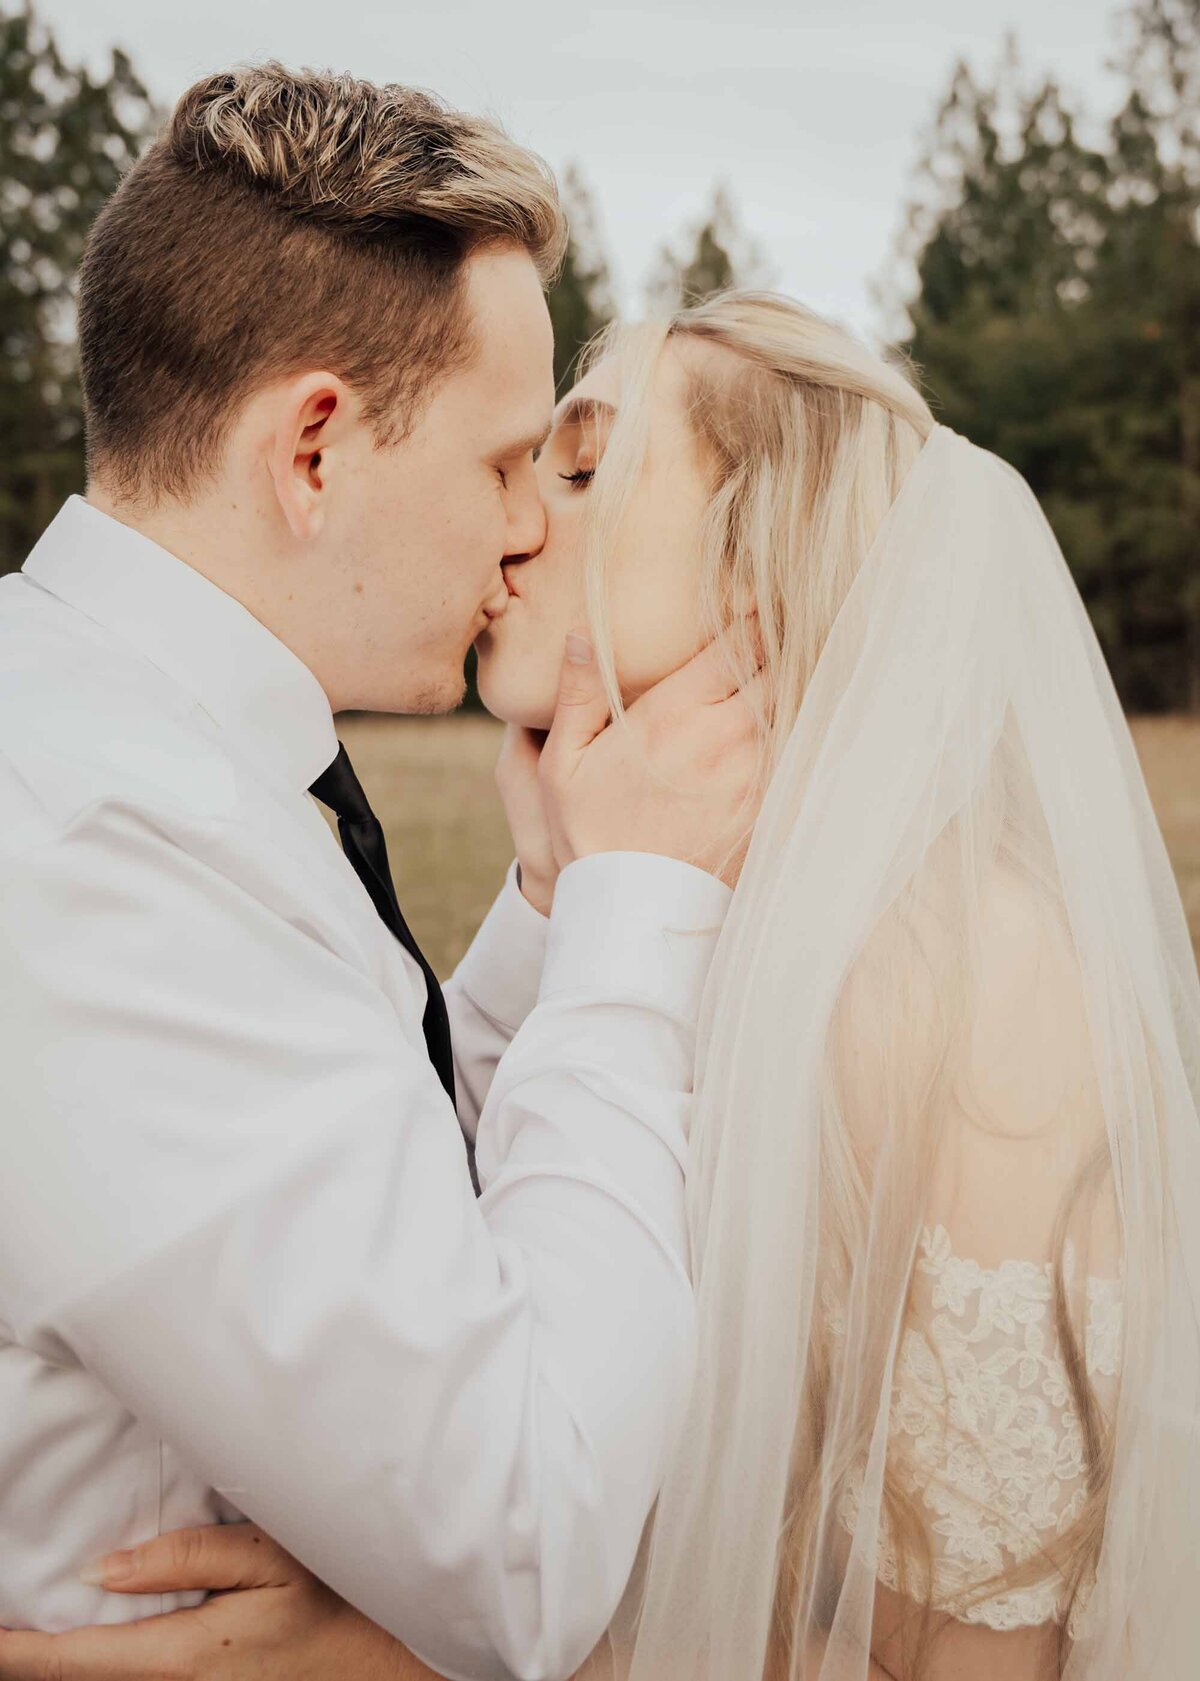 Maddie Rae Photography close up of bride and groom kissing. his hands are on her face and her hands are on his waist